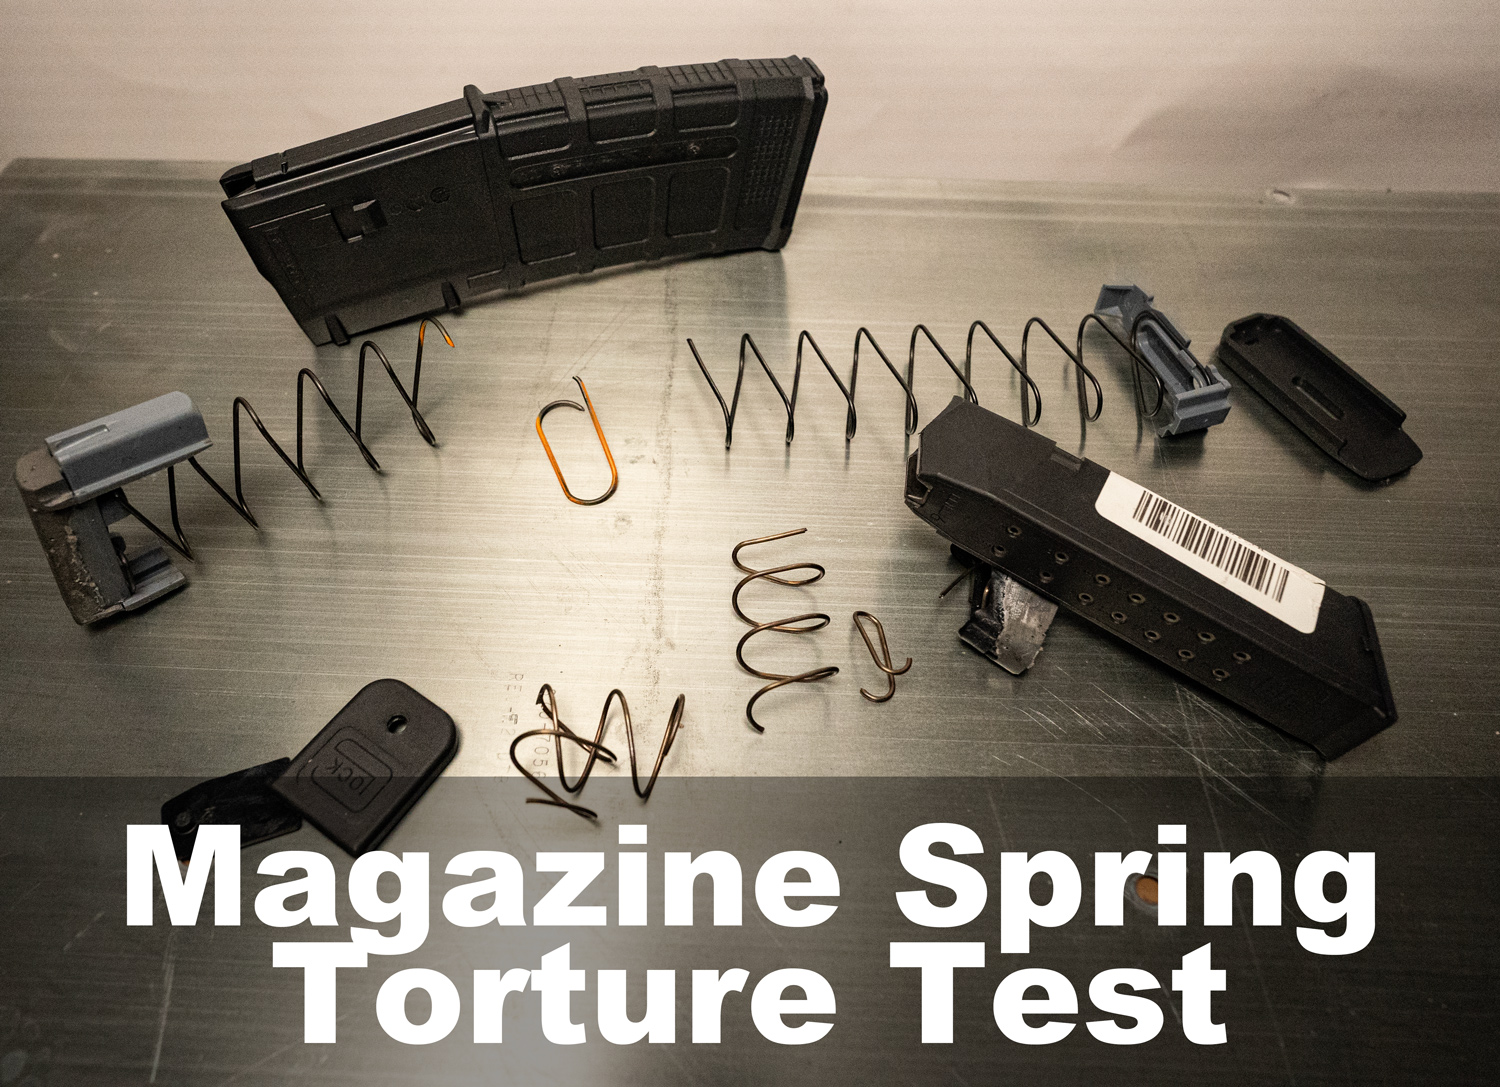 rifle and glock magazines damaged during torture testing